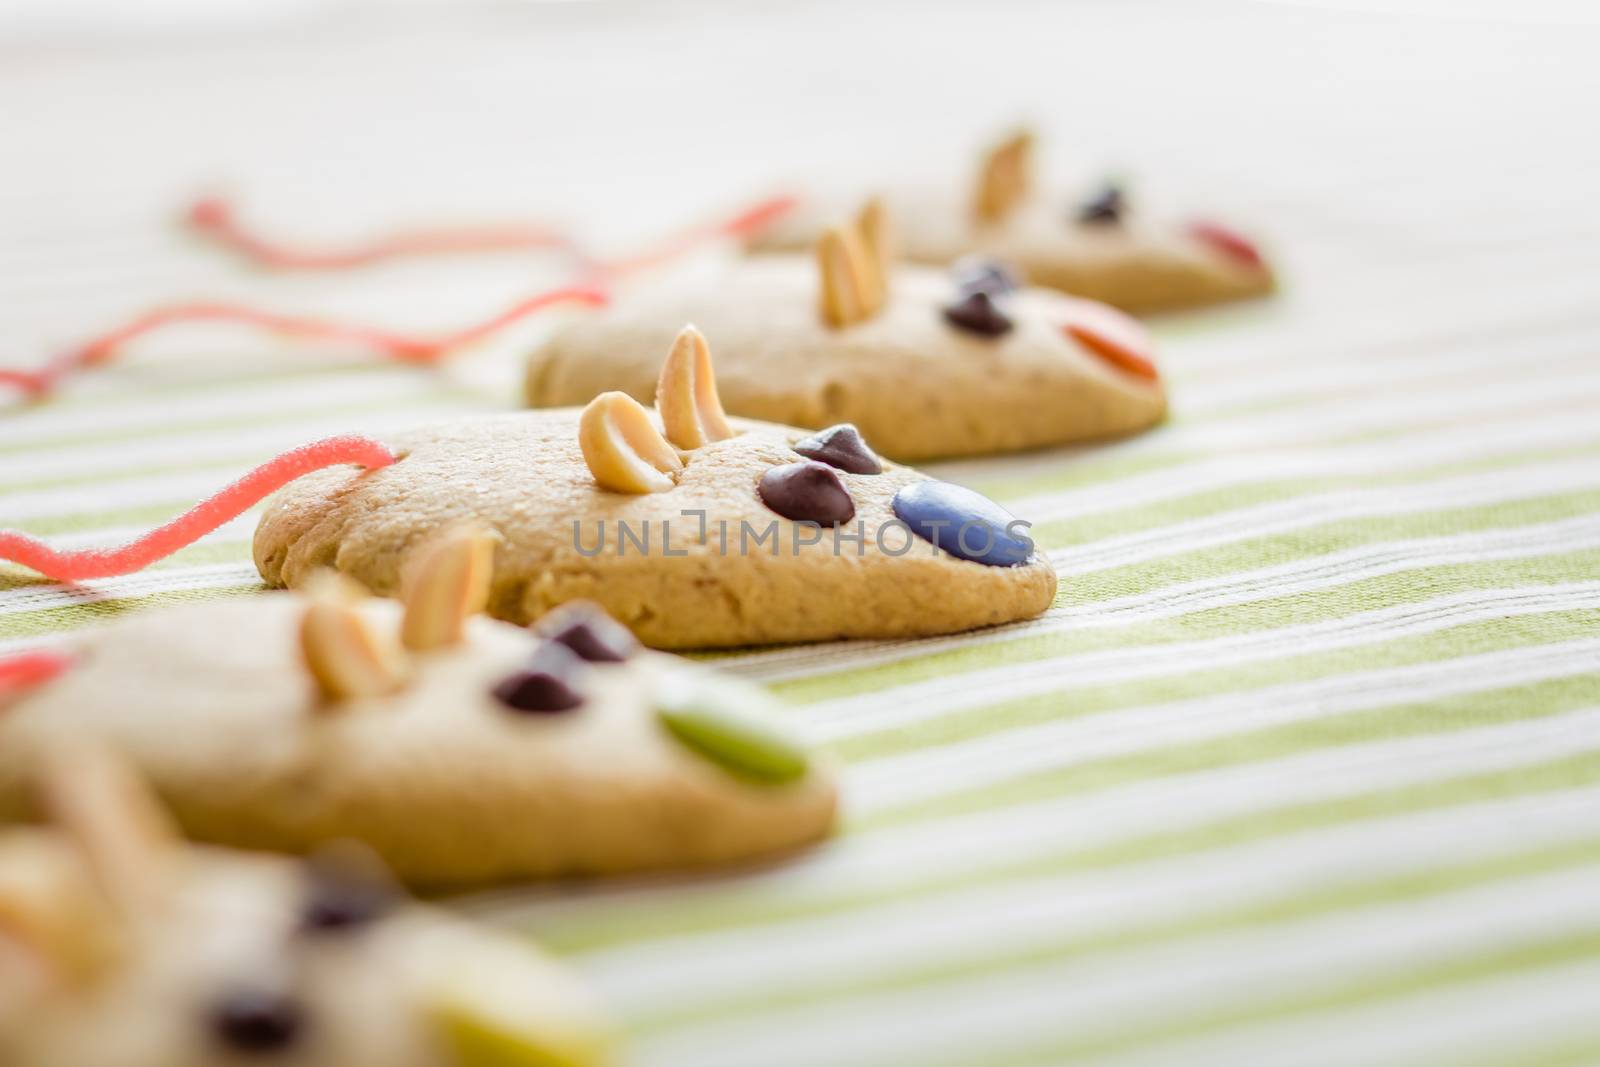 Cookies with mouse shaped and red licorice tail by doble.d